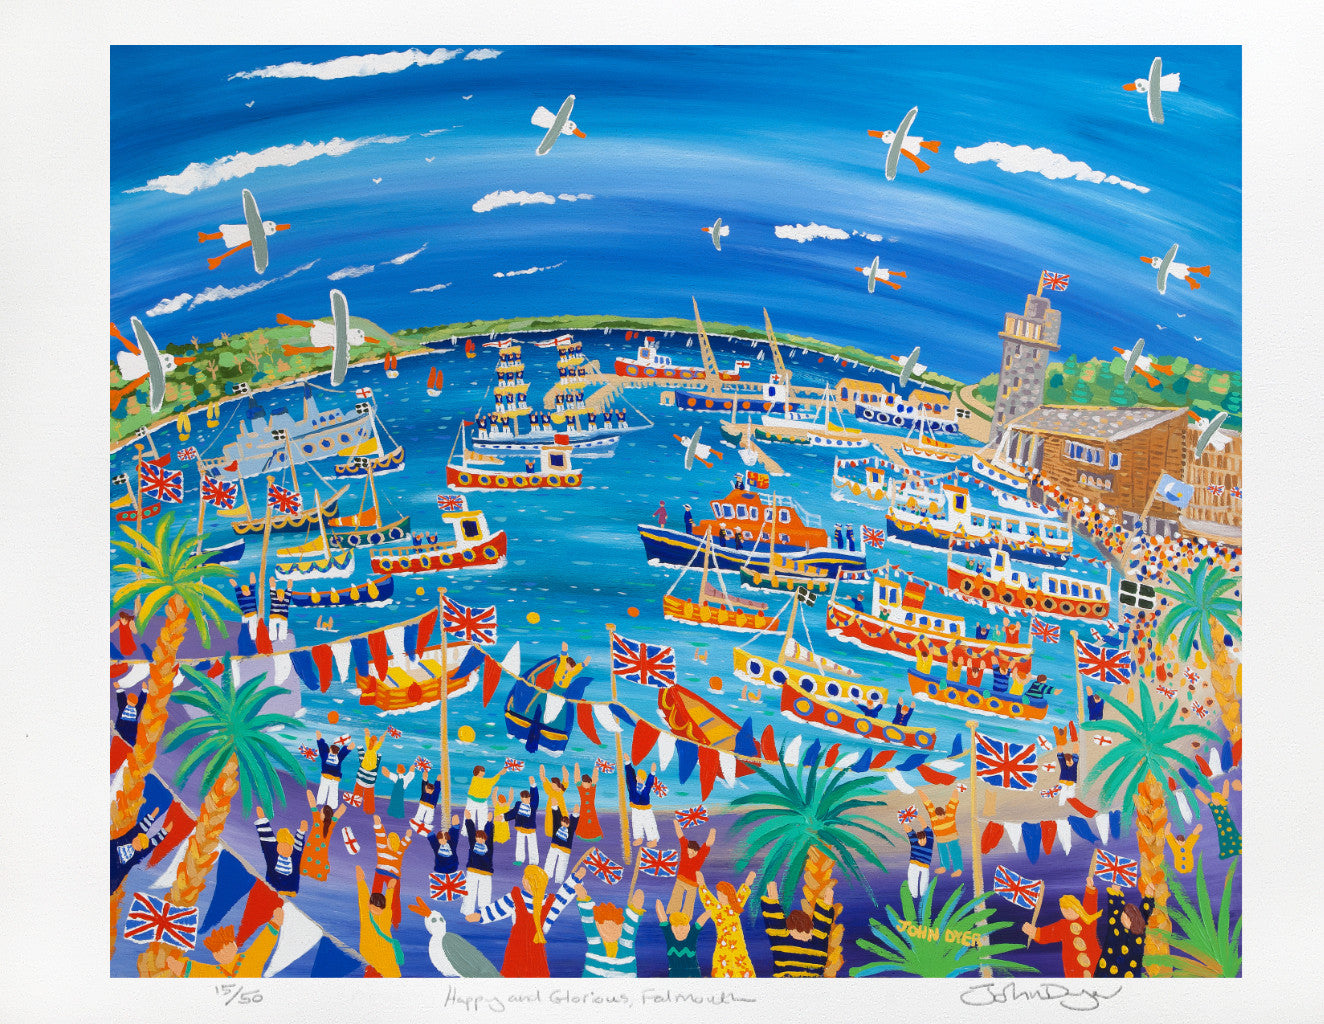 Limited Edition Print by Cornish Artist John Dyer. 'Happy and Glorious, Falmouth'. Queen's Golden Jubilee Falmouth. Cornwall Art Gallery print